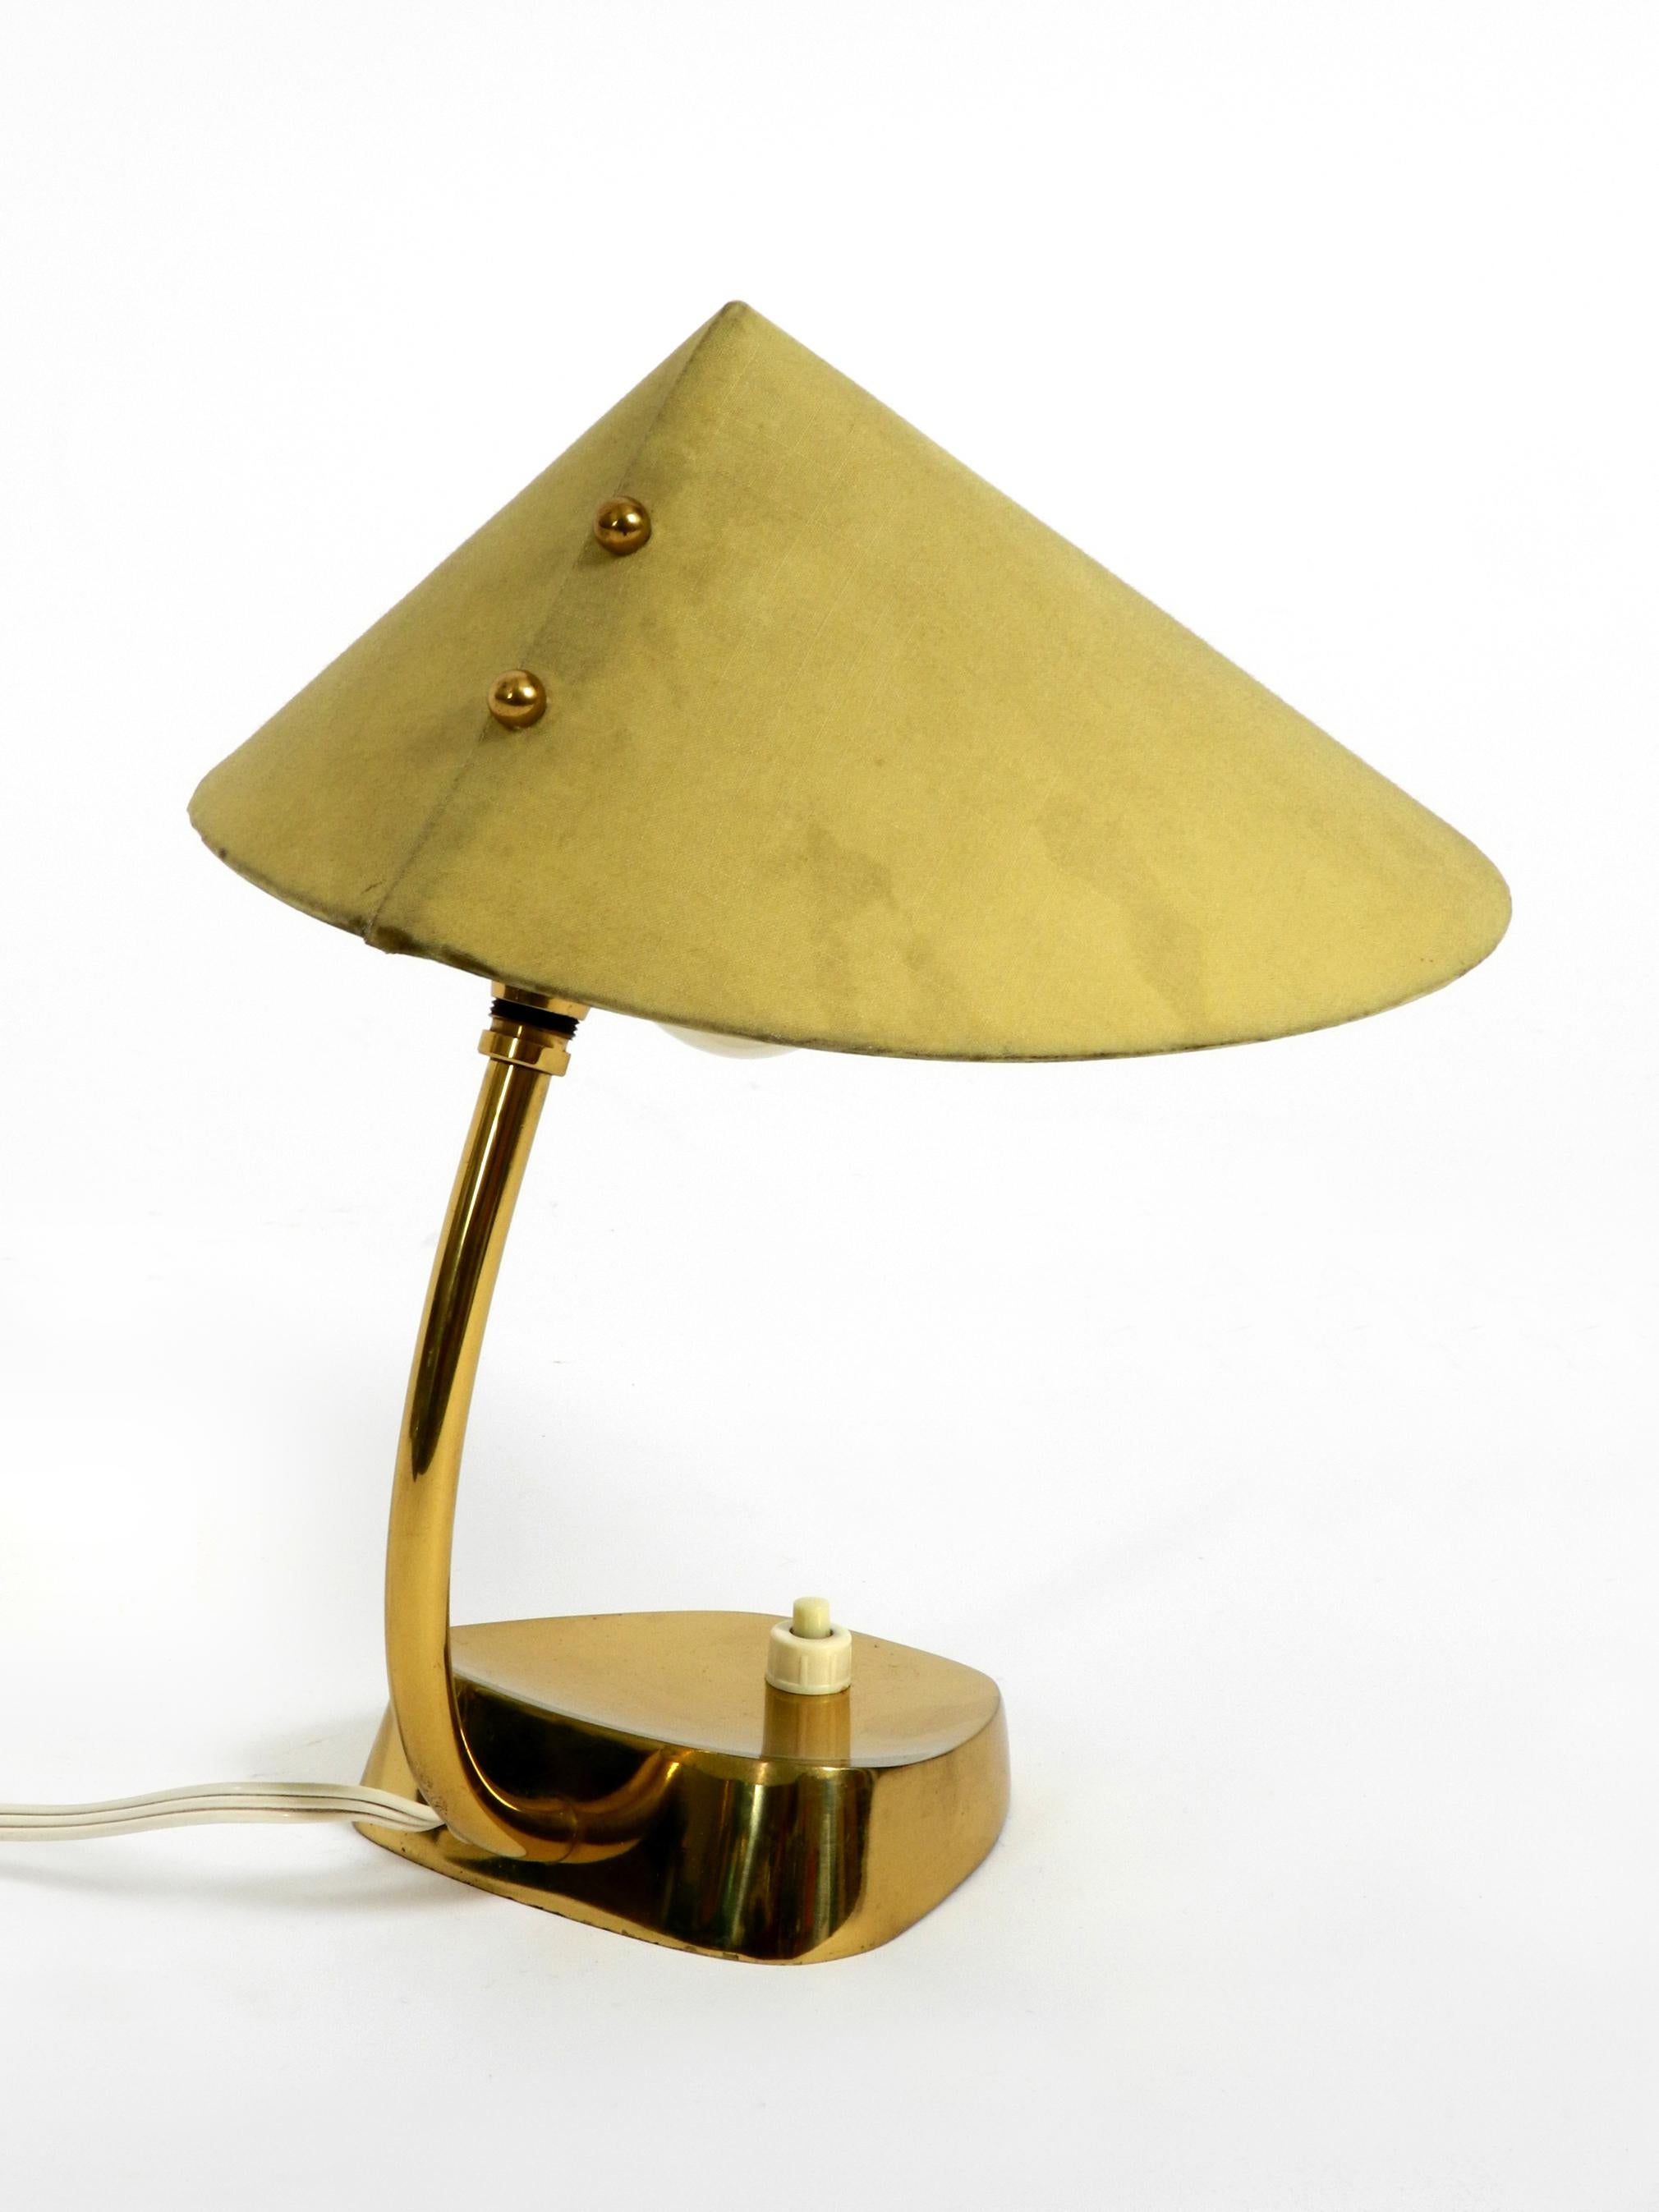 Very Rare Midcentury Brass Table Lamp with Fabric Shade by J. T. Kalmar Austria In Good Condition For Sale In München, DE